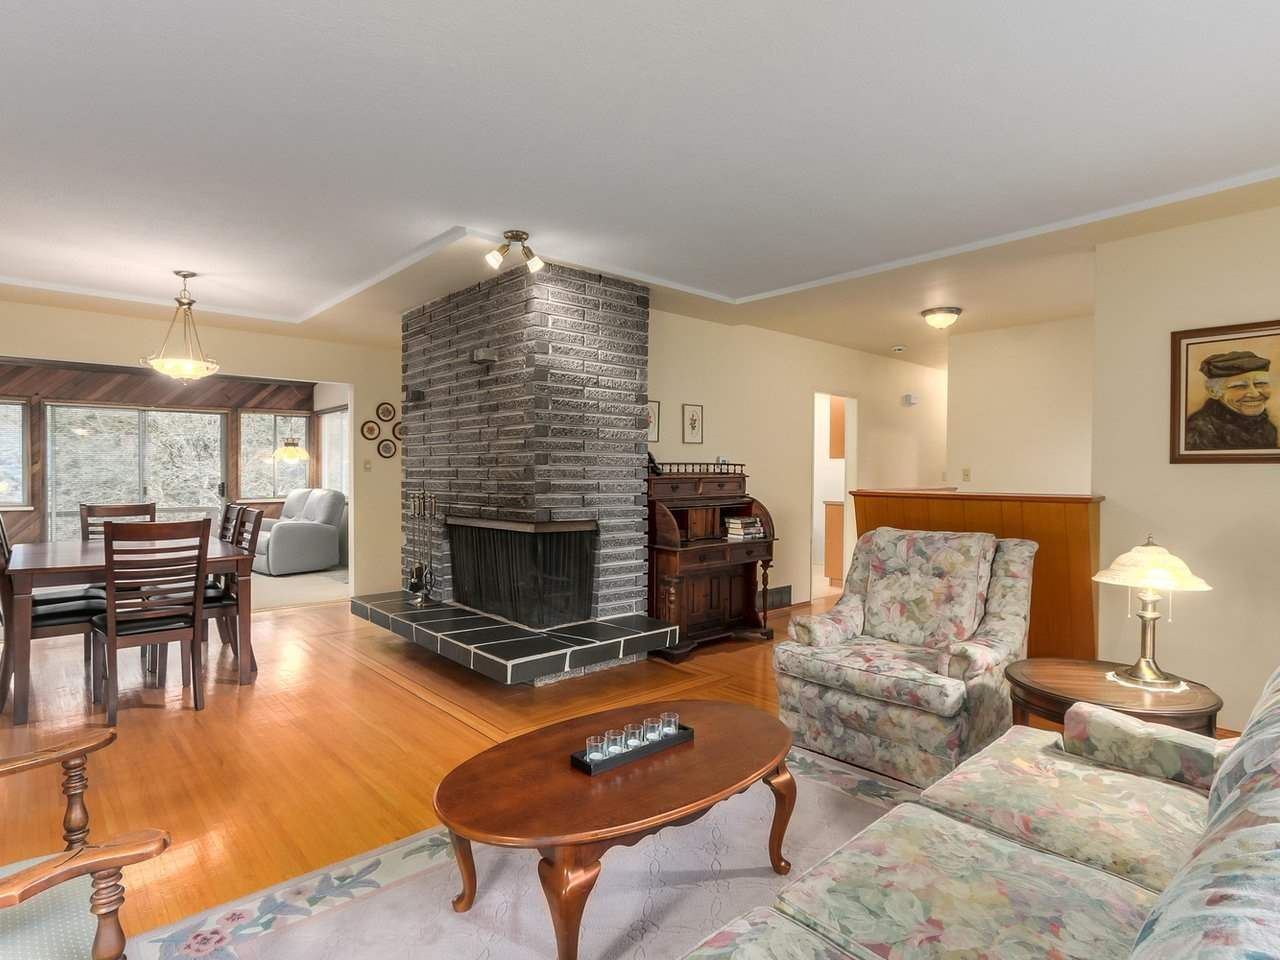 Photo 5: Photos: 1970 ORLAND Drive in Coquitlam: Central Coquitlam House for sale : MLS®# R2330558